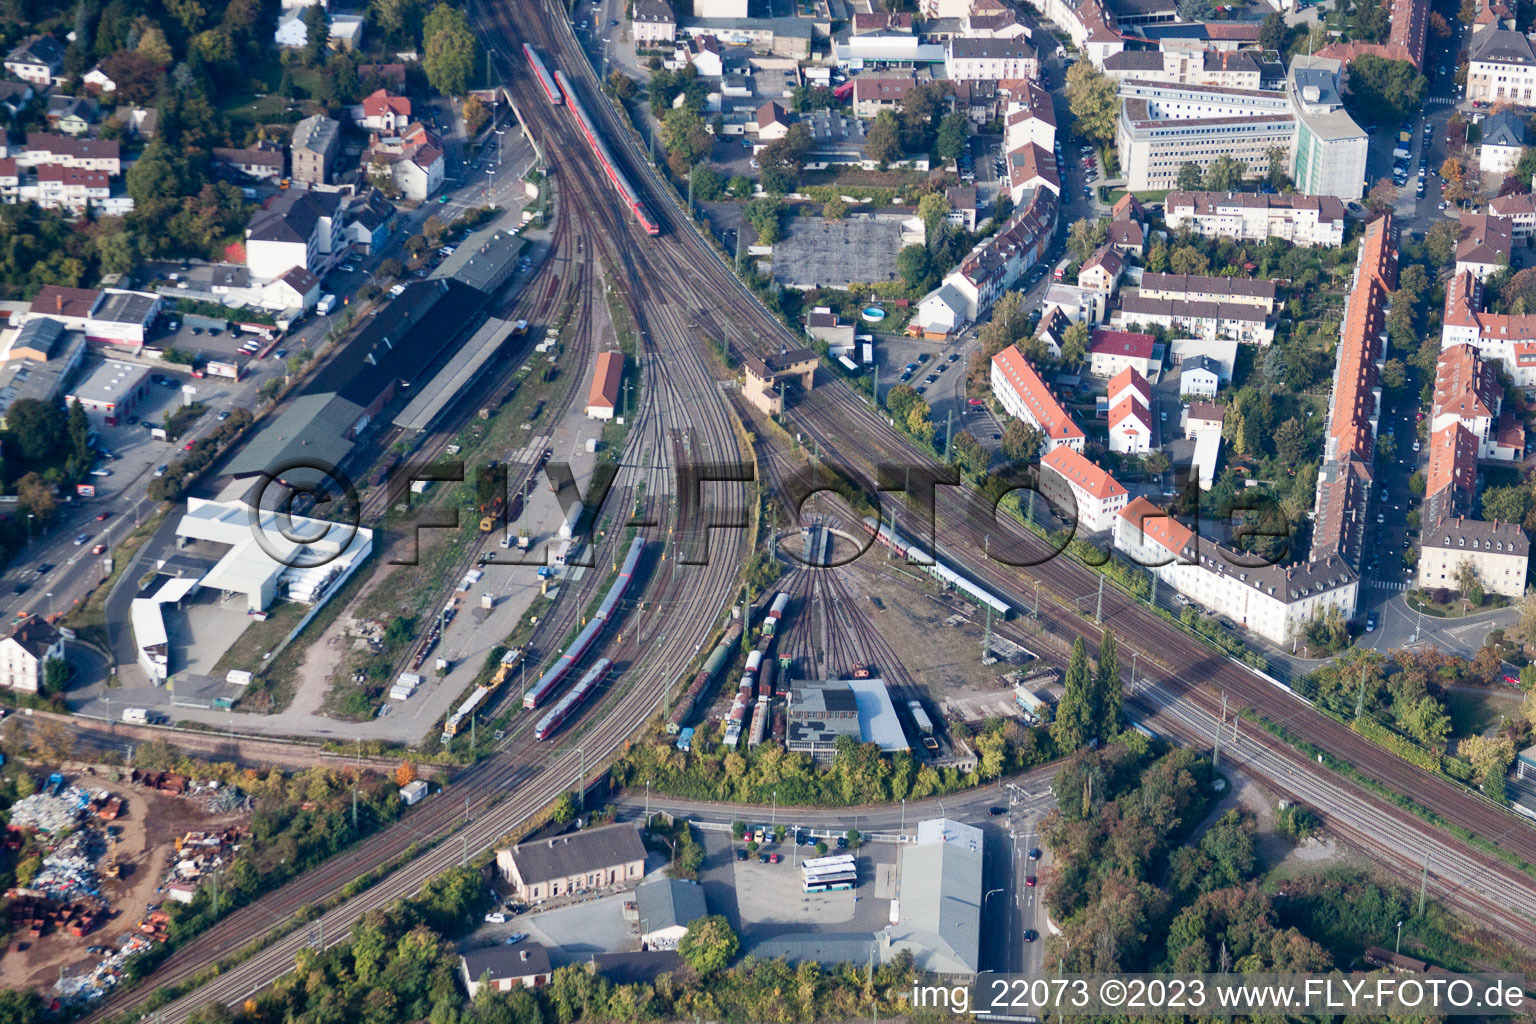 Aerial photograpy of Track triangle in Neustadt an der Weinstraße in the state Rhineland-Palatinate, Germany